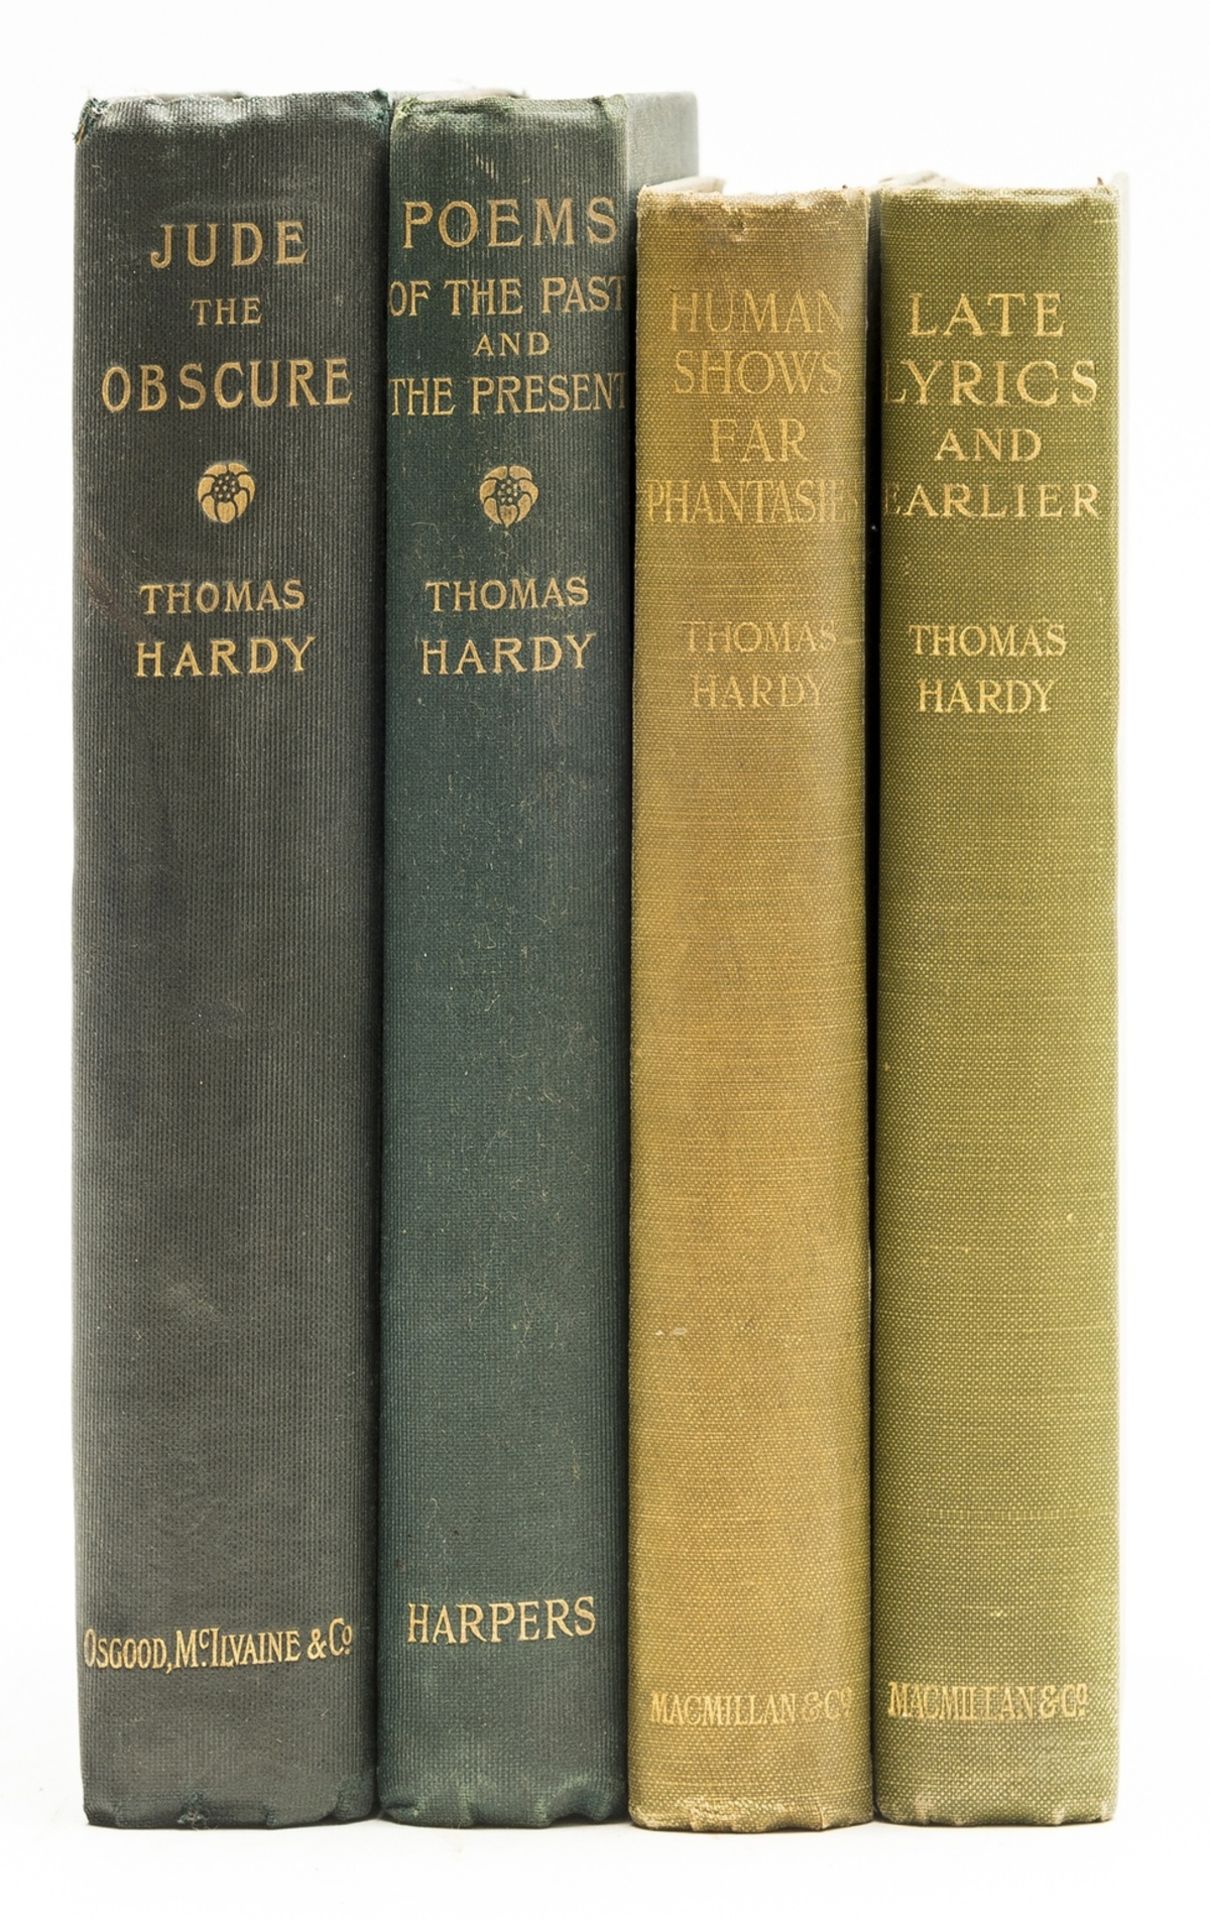 Hardy (Thomas) ) Jude the Obscure, first edition, original cloth, 1896 & others by Hardy (4)